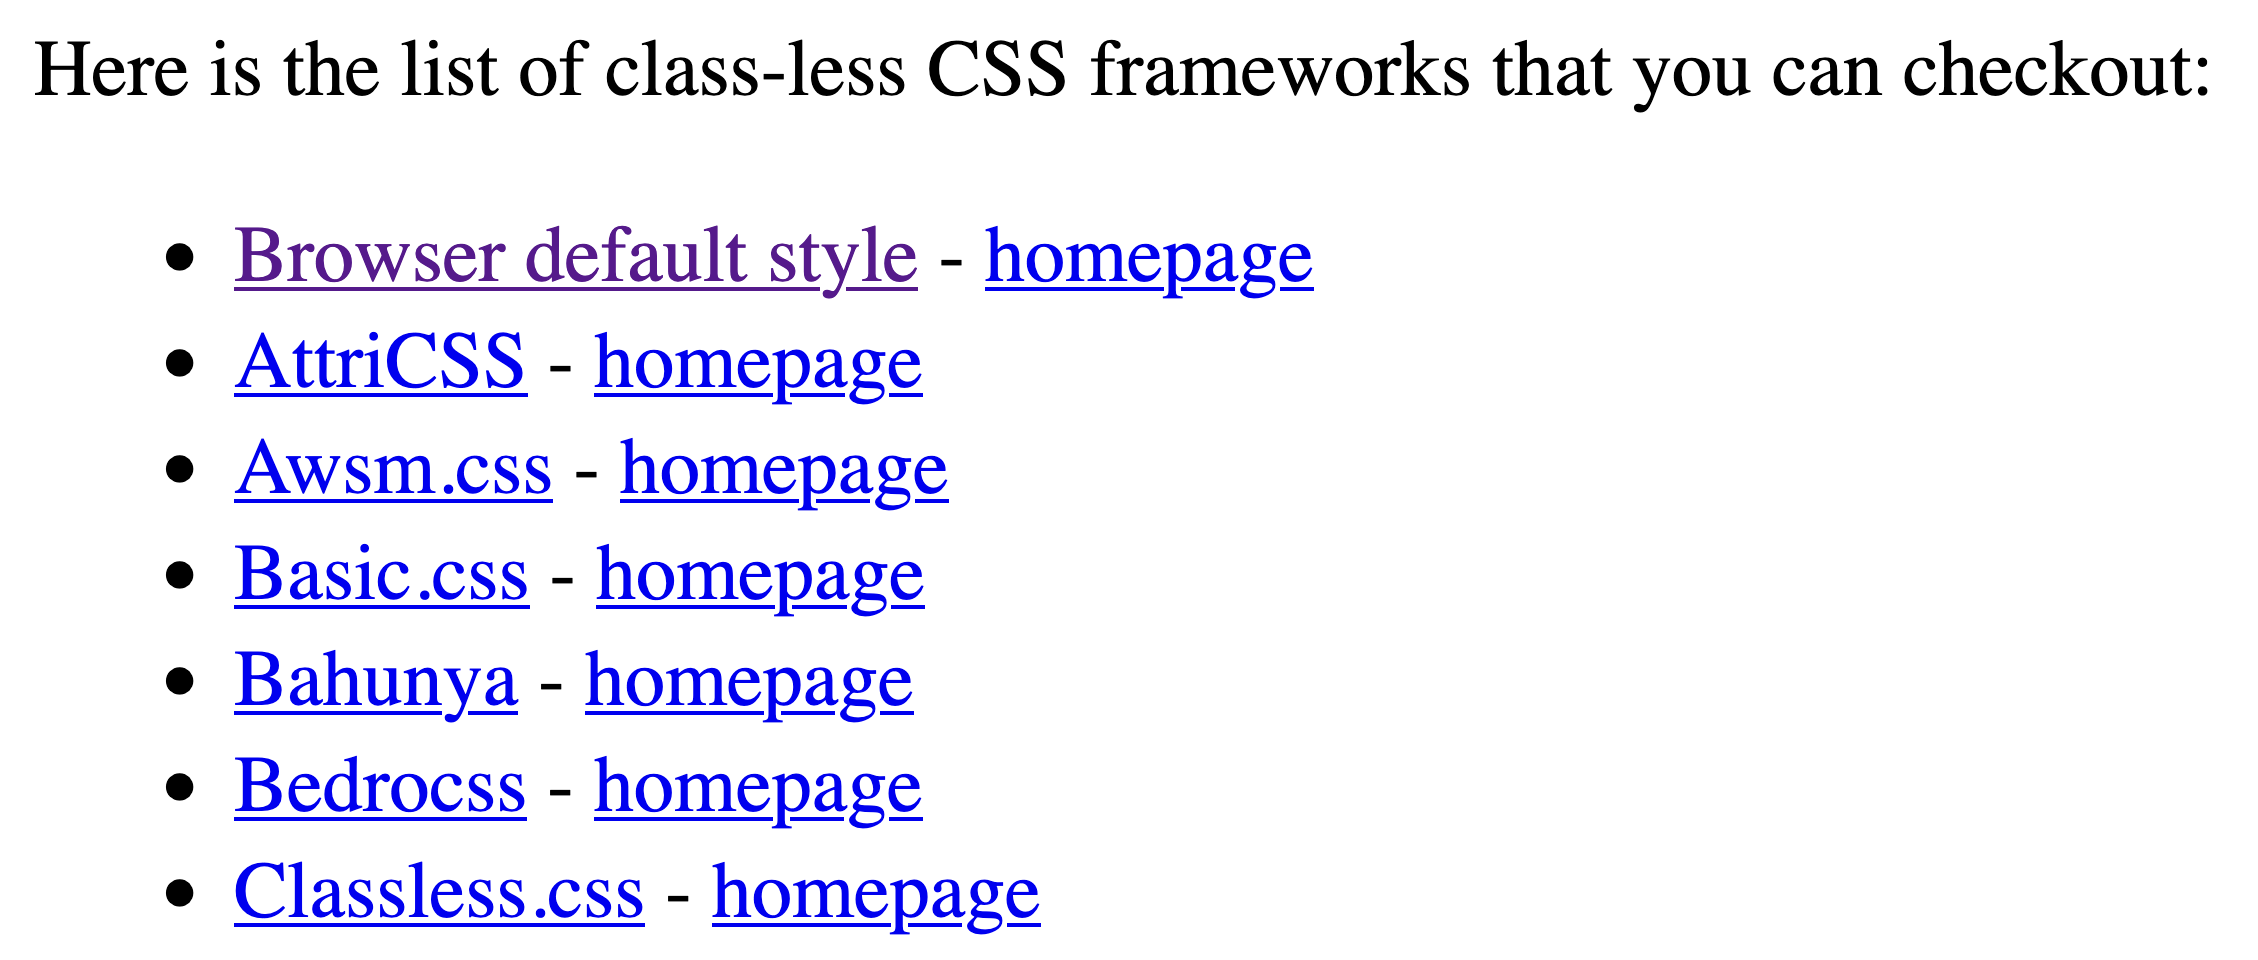 Here is the list of class-less CSS frameworks that you can checkout.